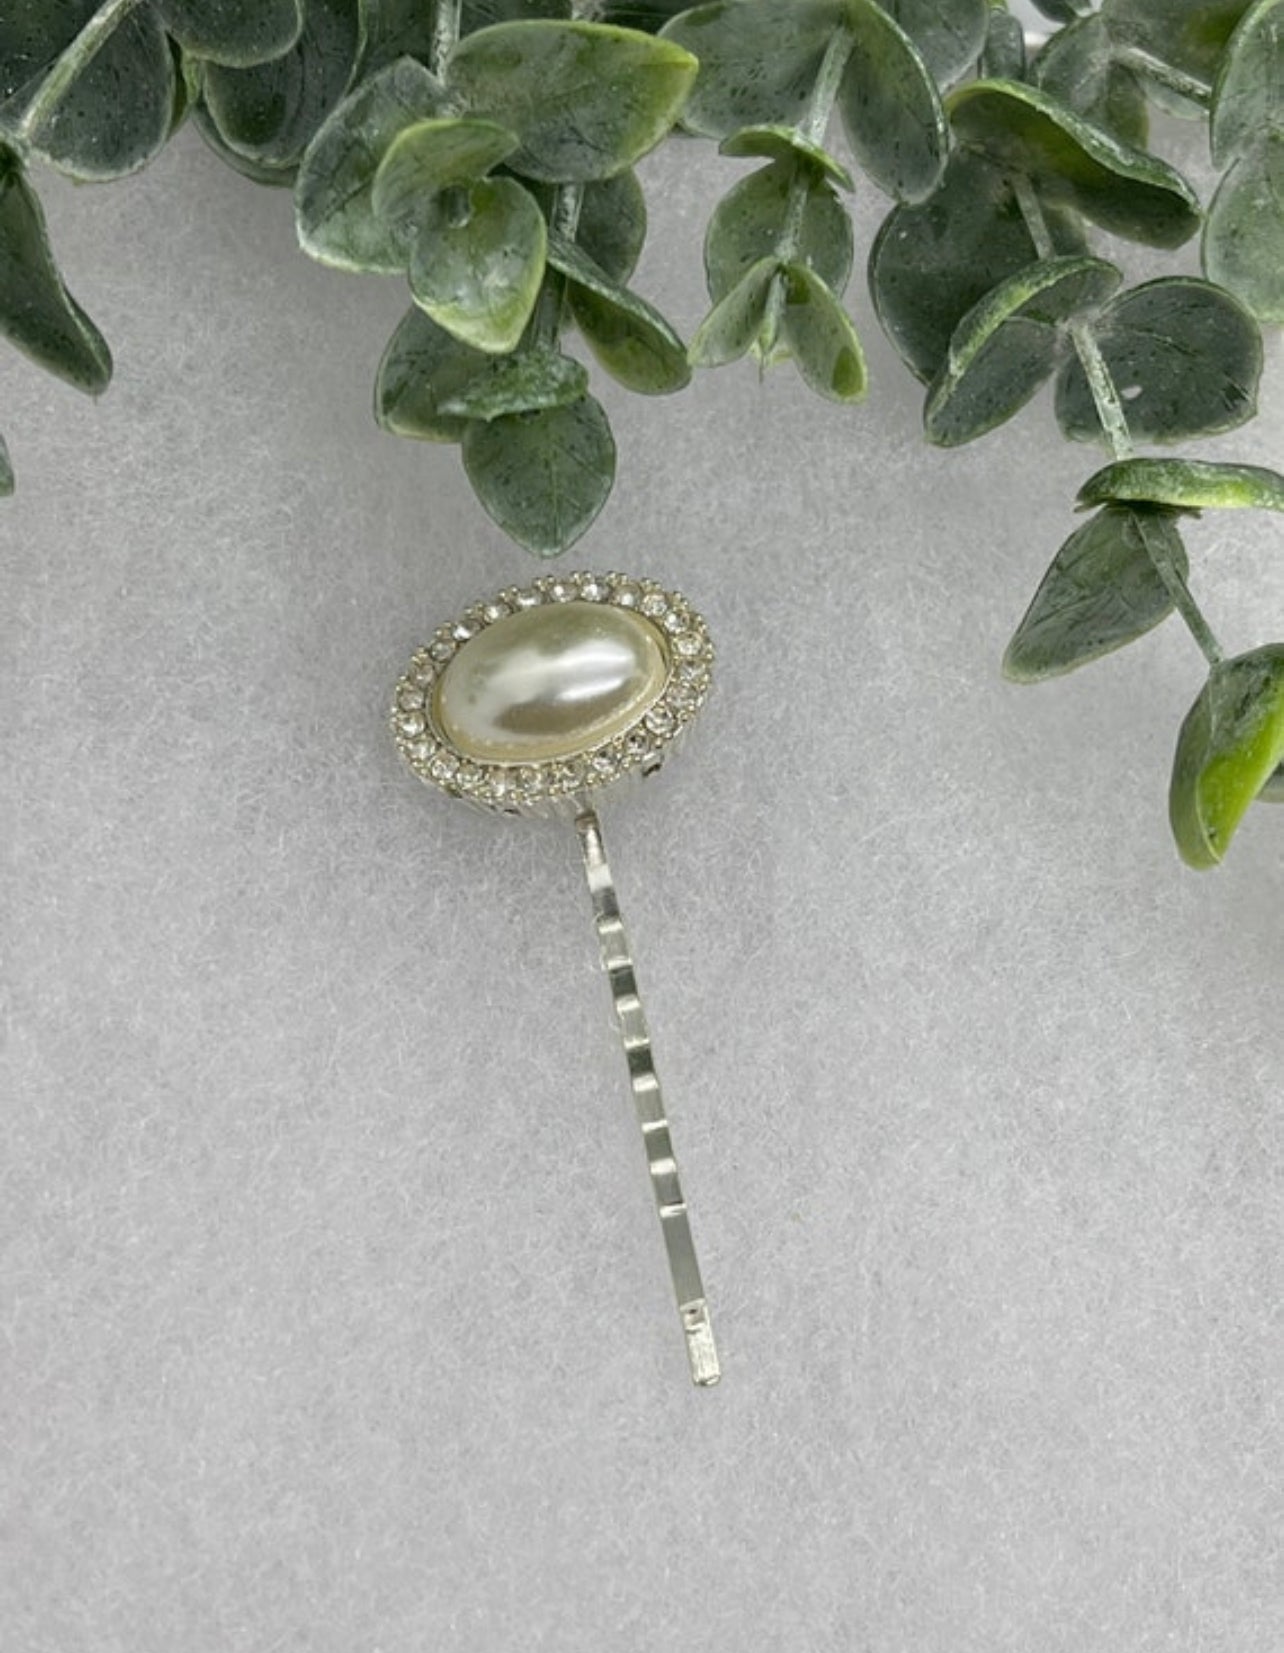 large faux pearl crystal vintage antique style hair pin approximately 2.5” long Handmade hair accessory bridal wedding Retro